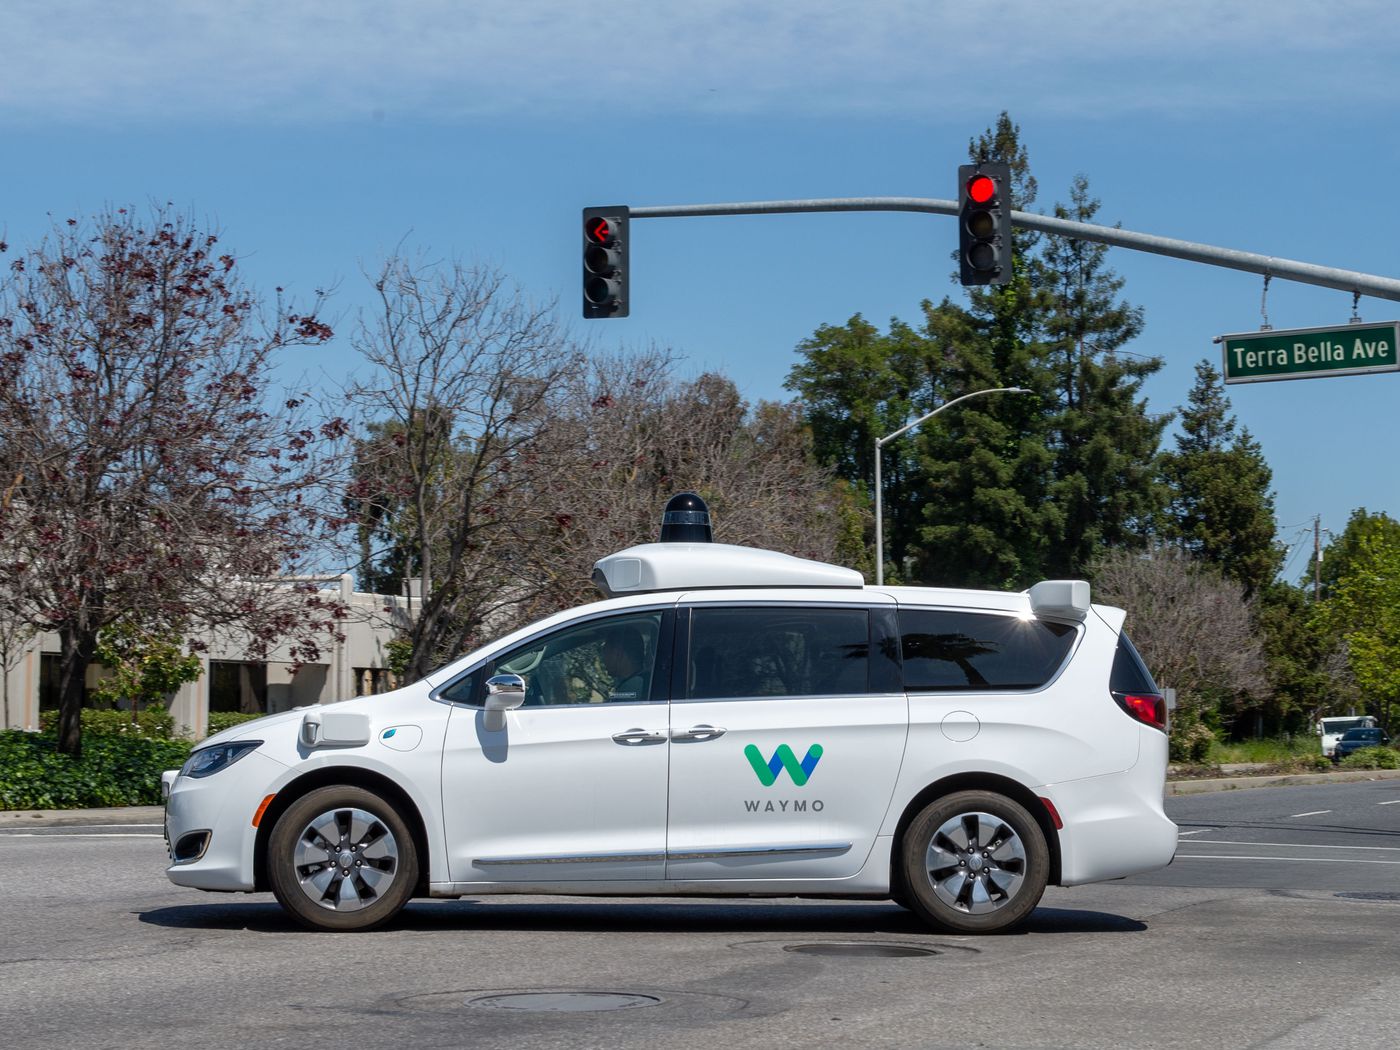 Meet the Future How Waymo's Self-Driving Taxis Are Changing Daily Commutes in Big Cities---